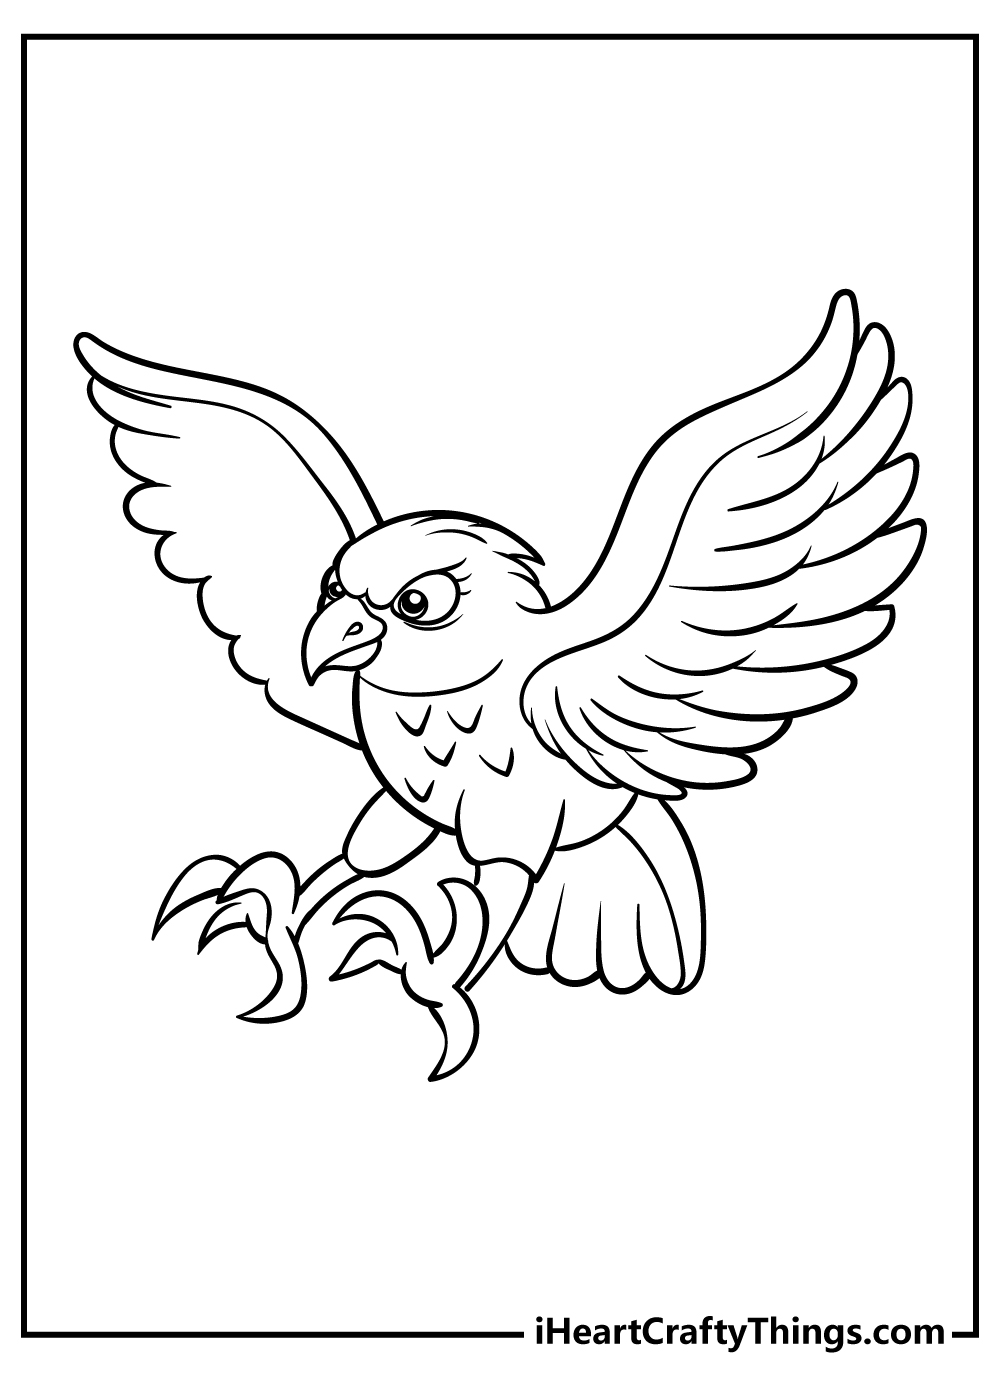 Hawk Coloring Pages for kids free download